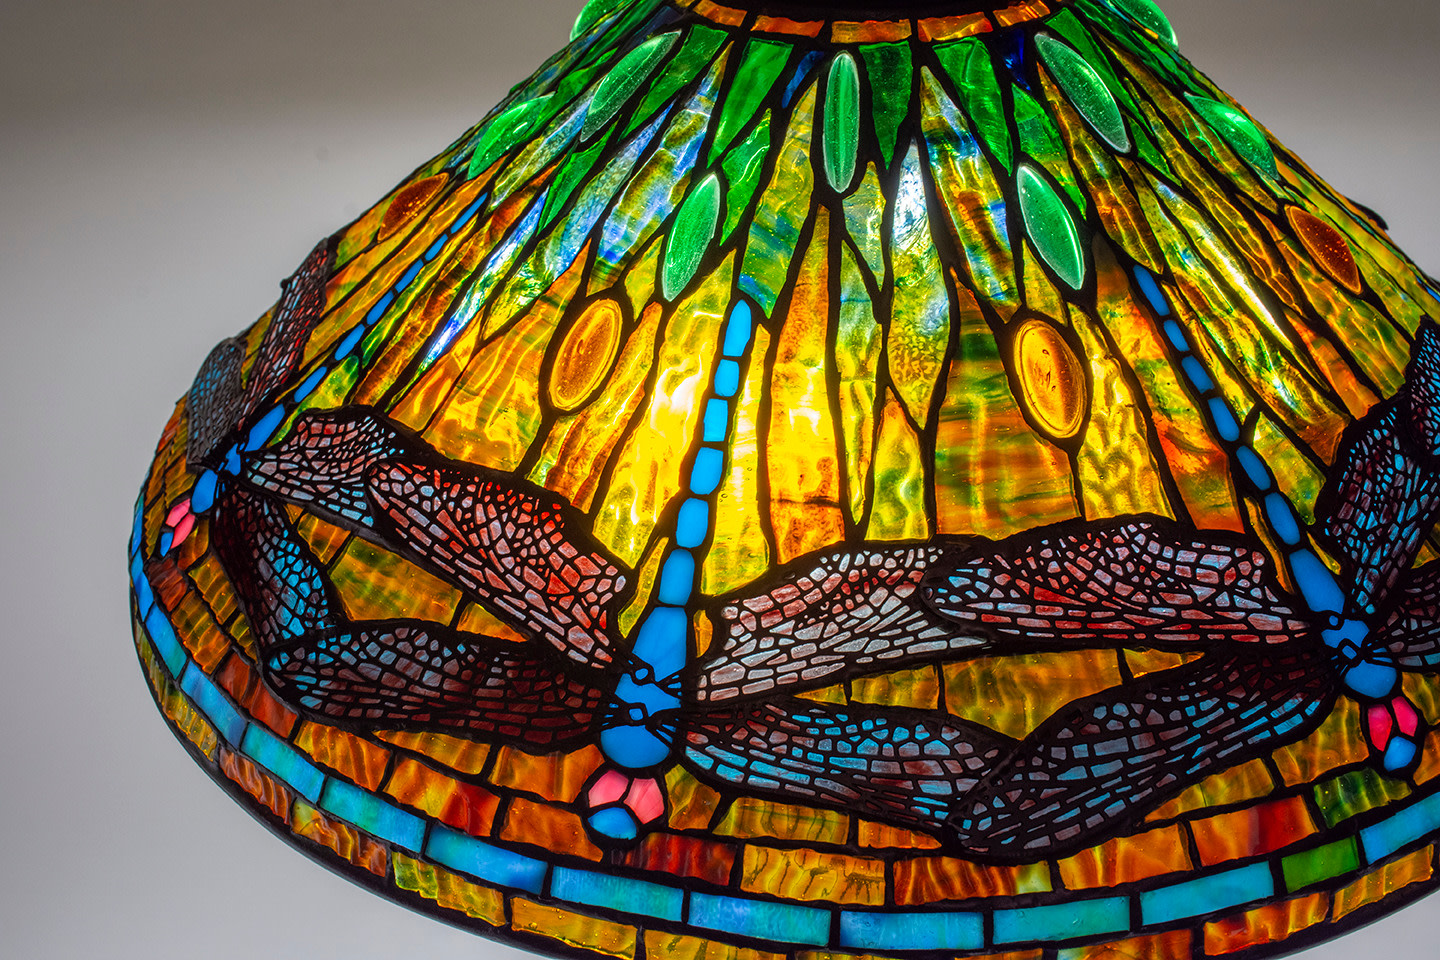 a 20-inch diameter cone-shaped leaded glass tiffany lamp shade depicting blue dragonflies with red eyes and striated blue and red wings, against a background of vibrant rippled tiffany glass in shades of orange and green